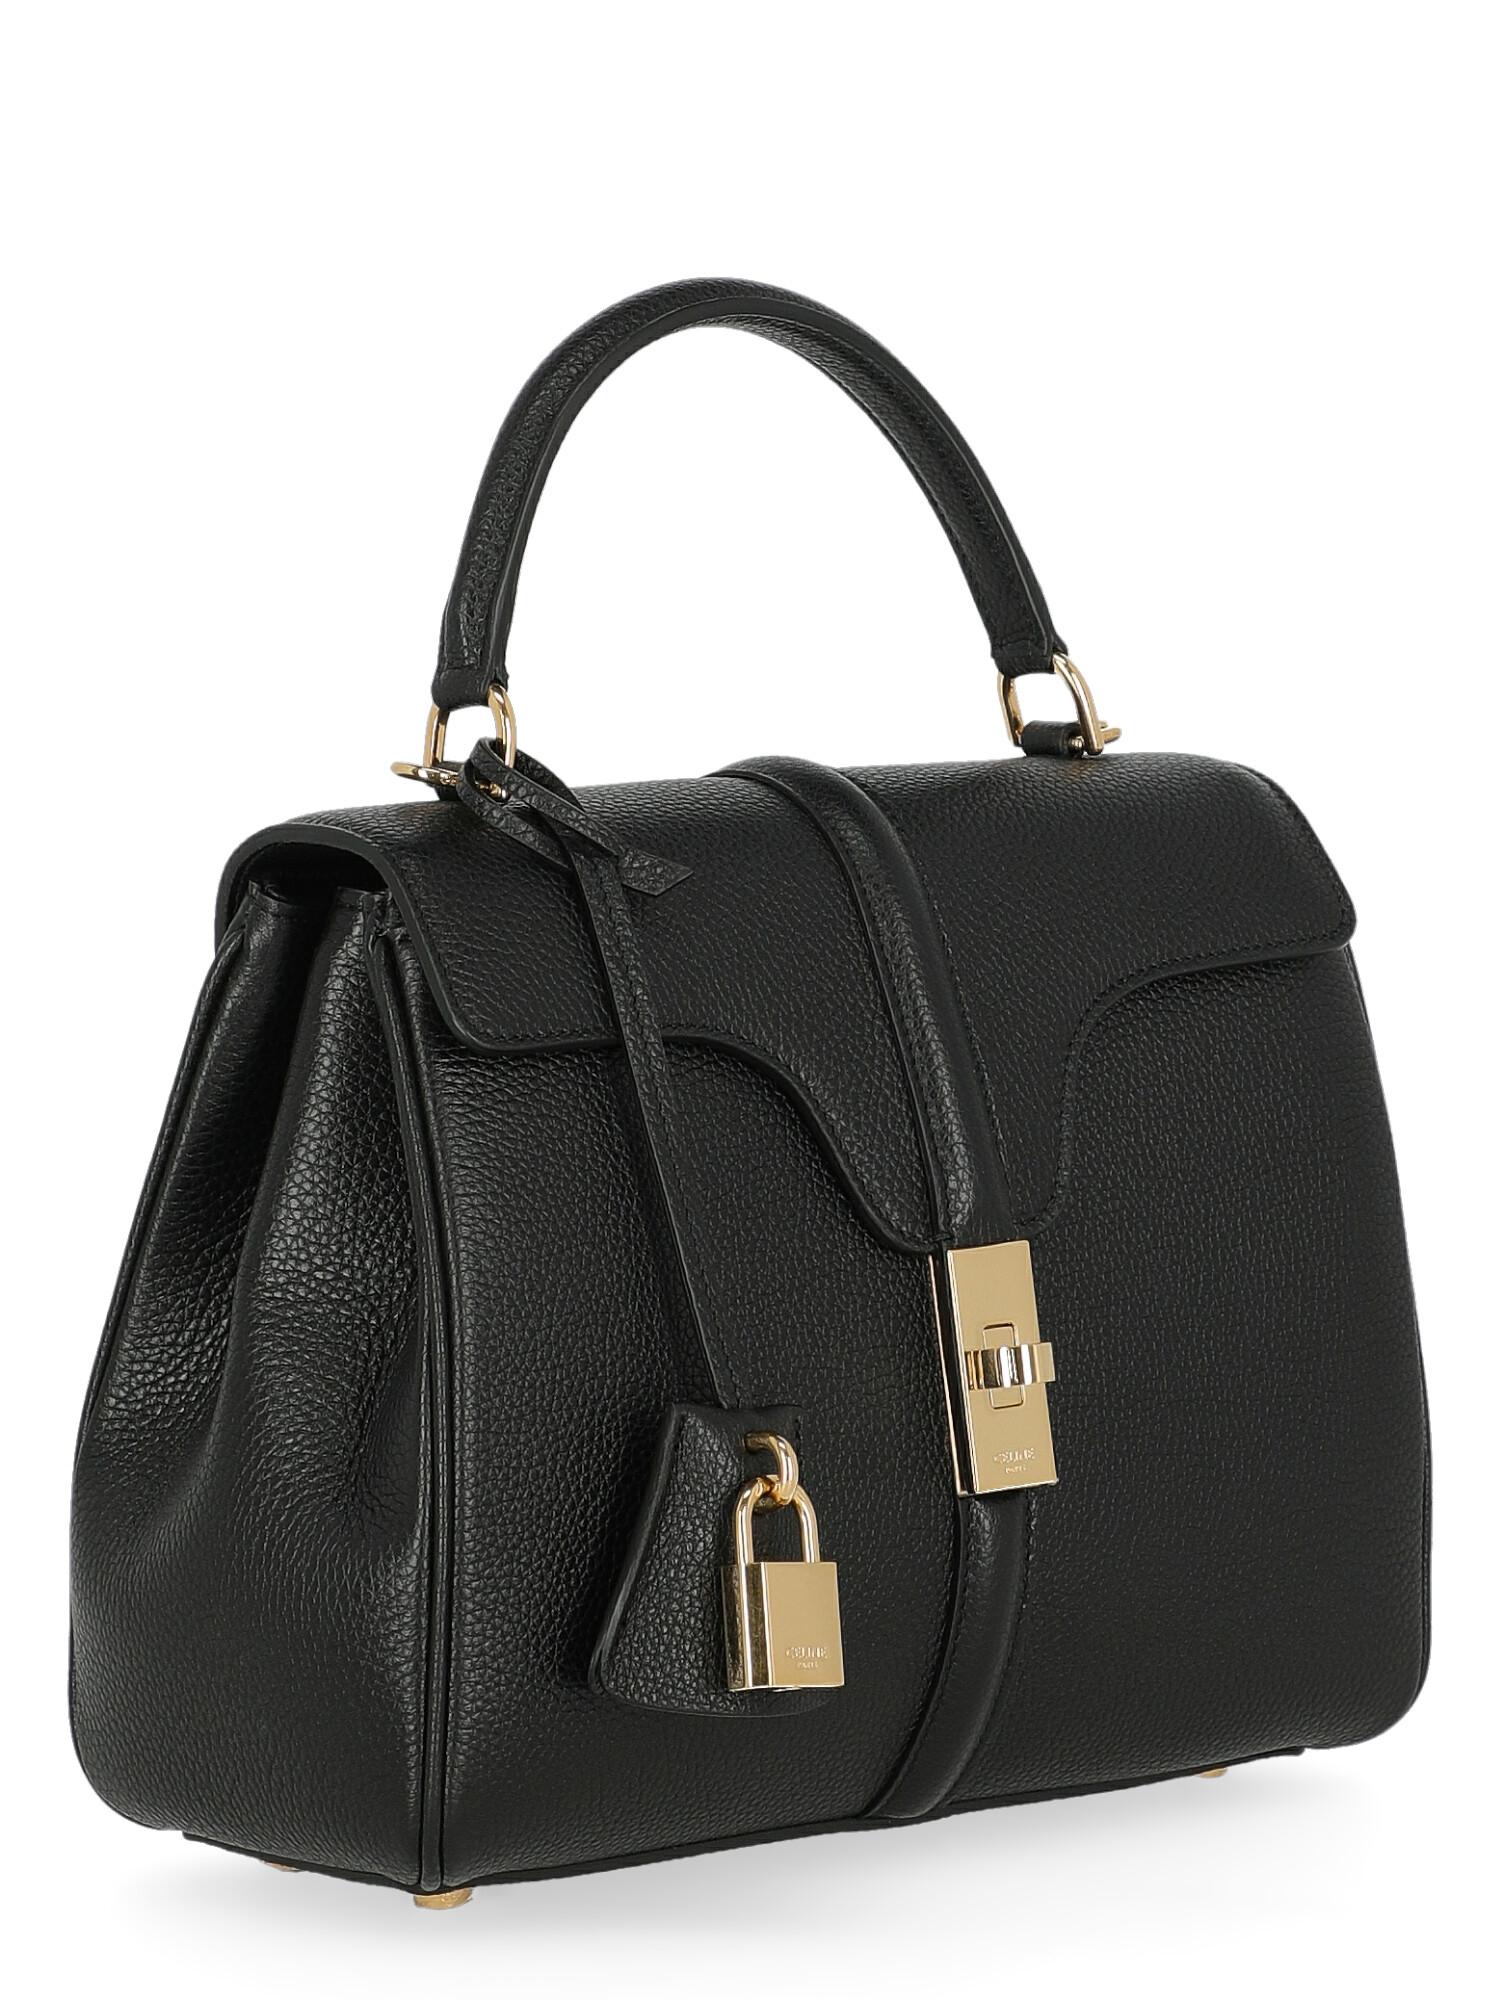 Celine  Women Handbags  Black Leather In Excellent Condition For Sale In Milan, IT